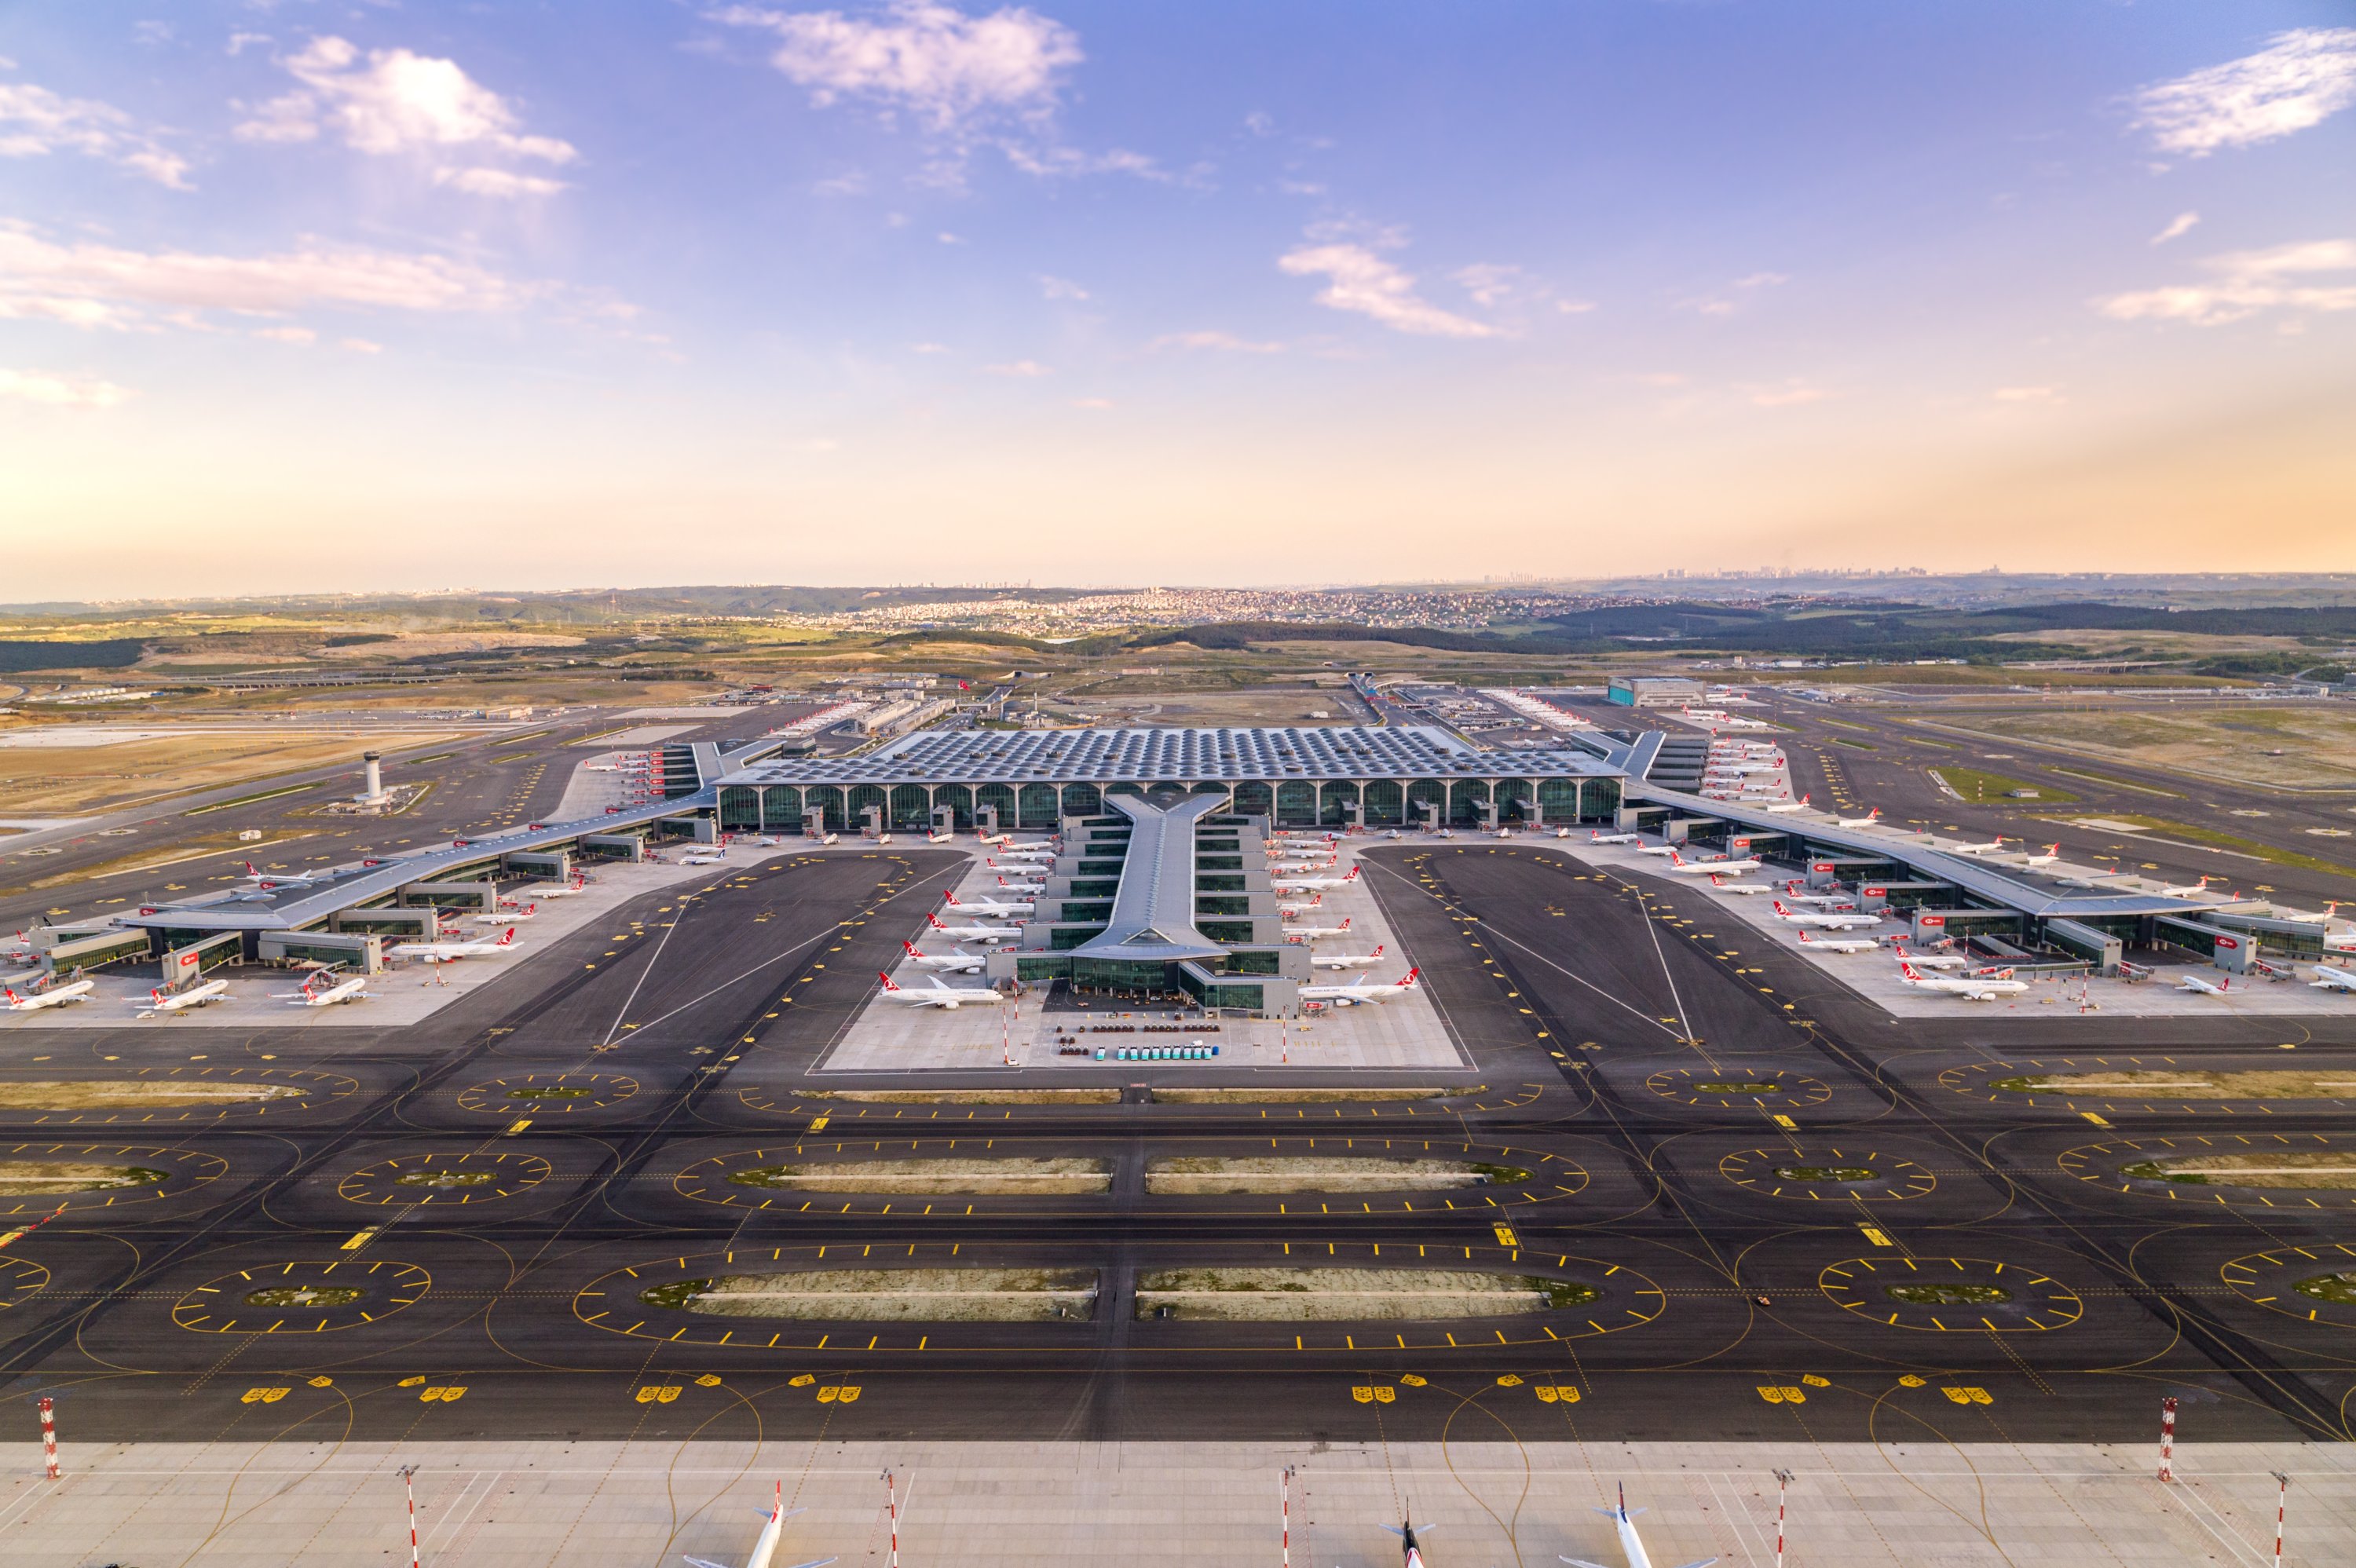 Top shareholder says $8.6B invested in Istanbul Airport so far